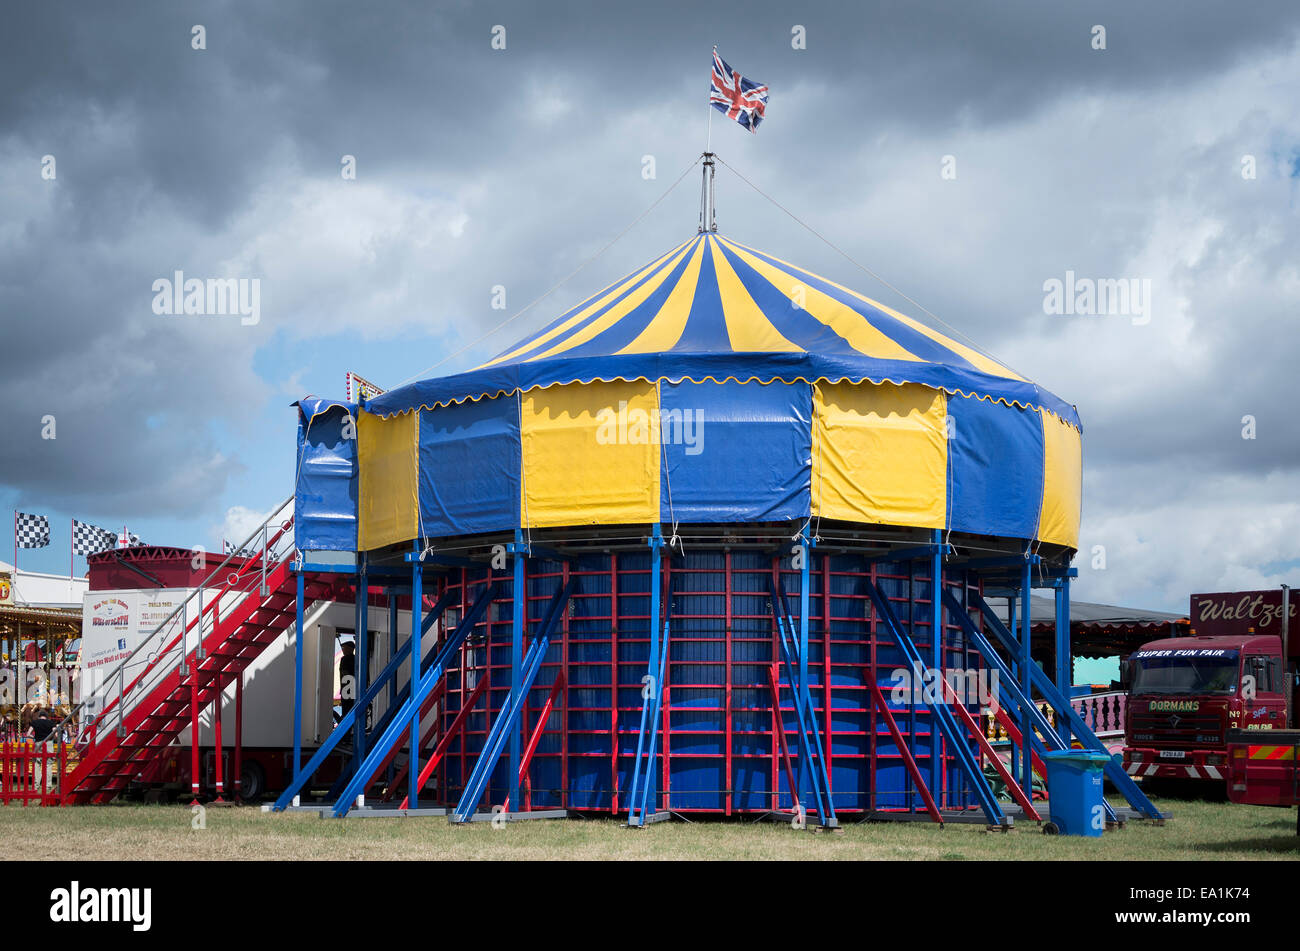 Exterior of the Wall of Death arena at a country fairground in UK Stock Photo